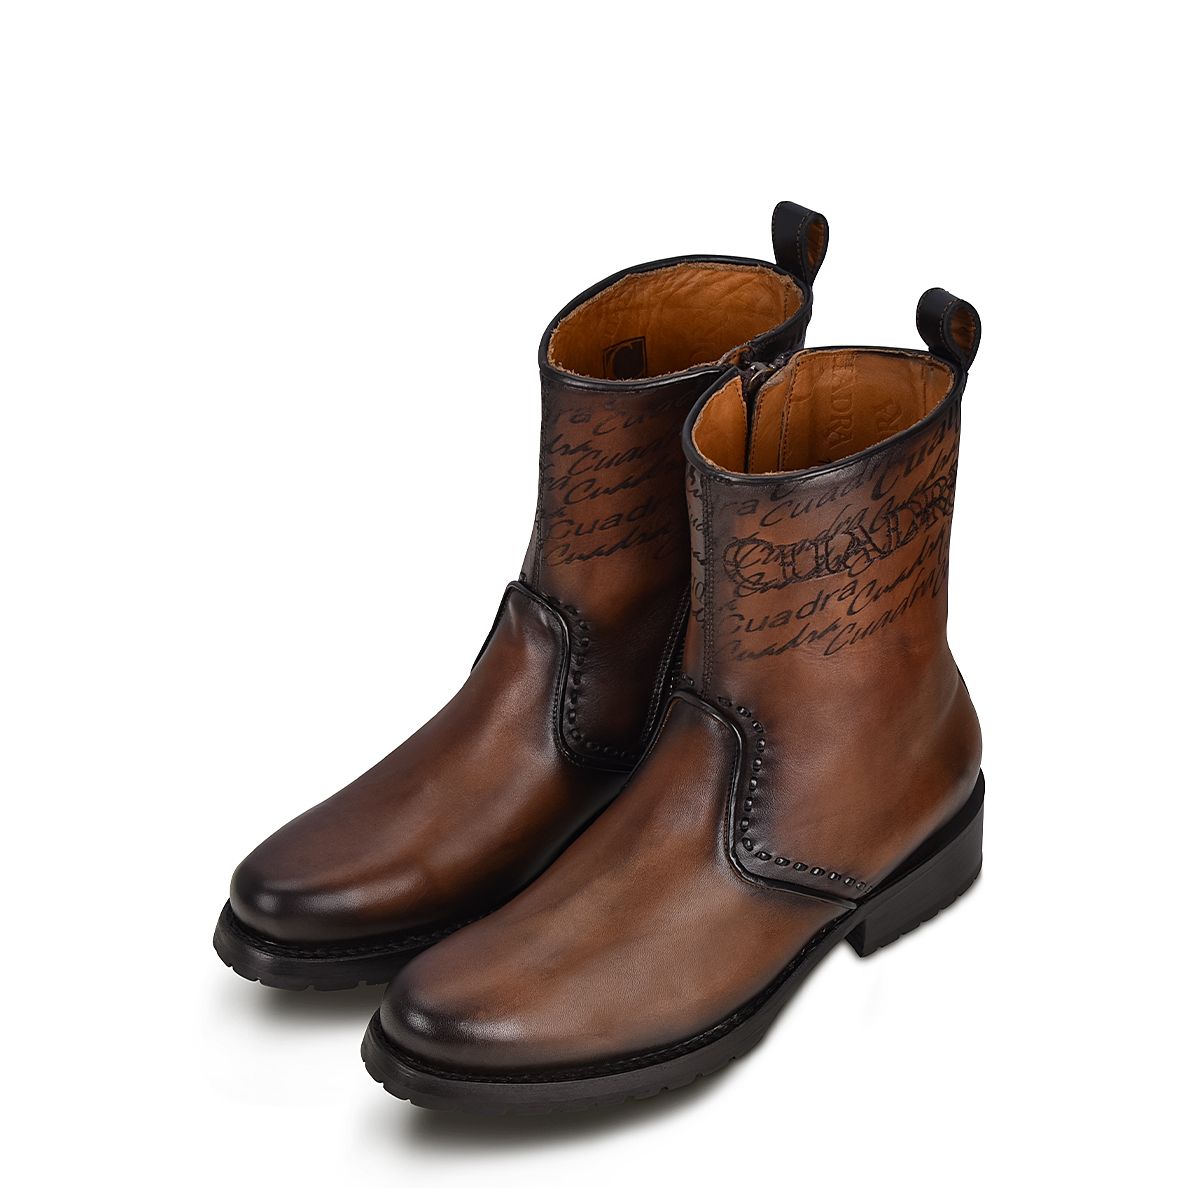 4D15RS - Cuadra brown dress casual leather zip ankle boots for men-Kuet.us